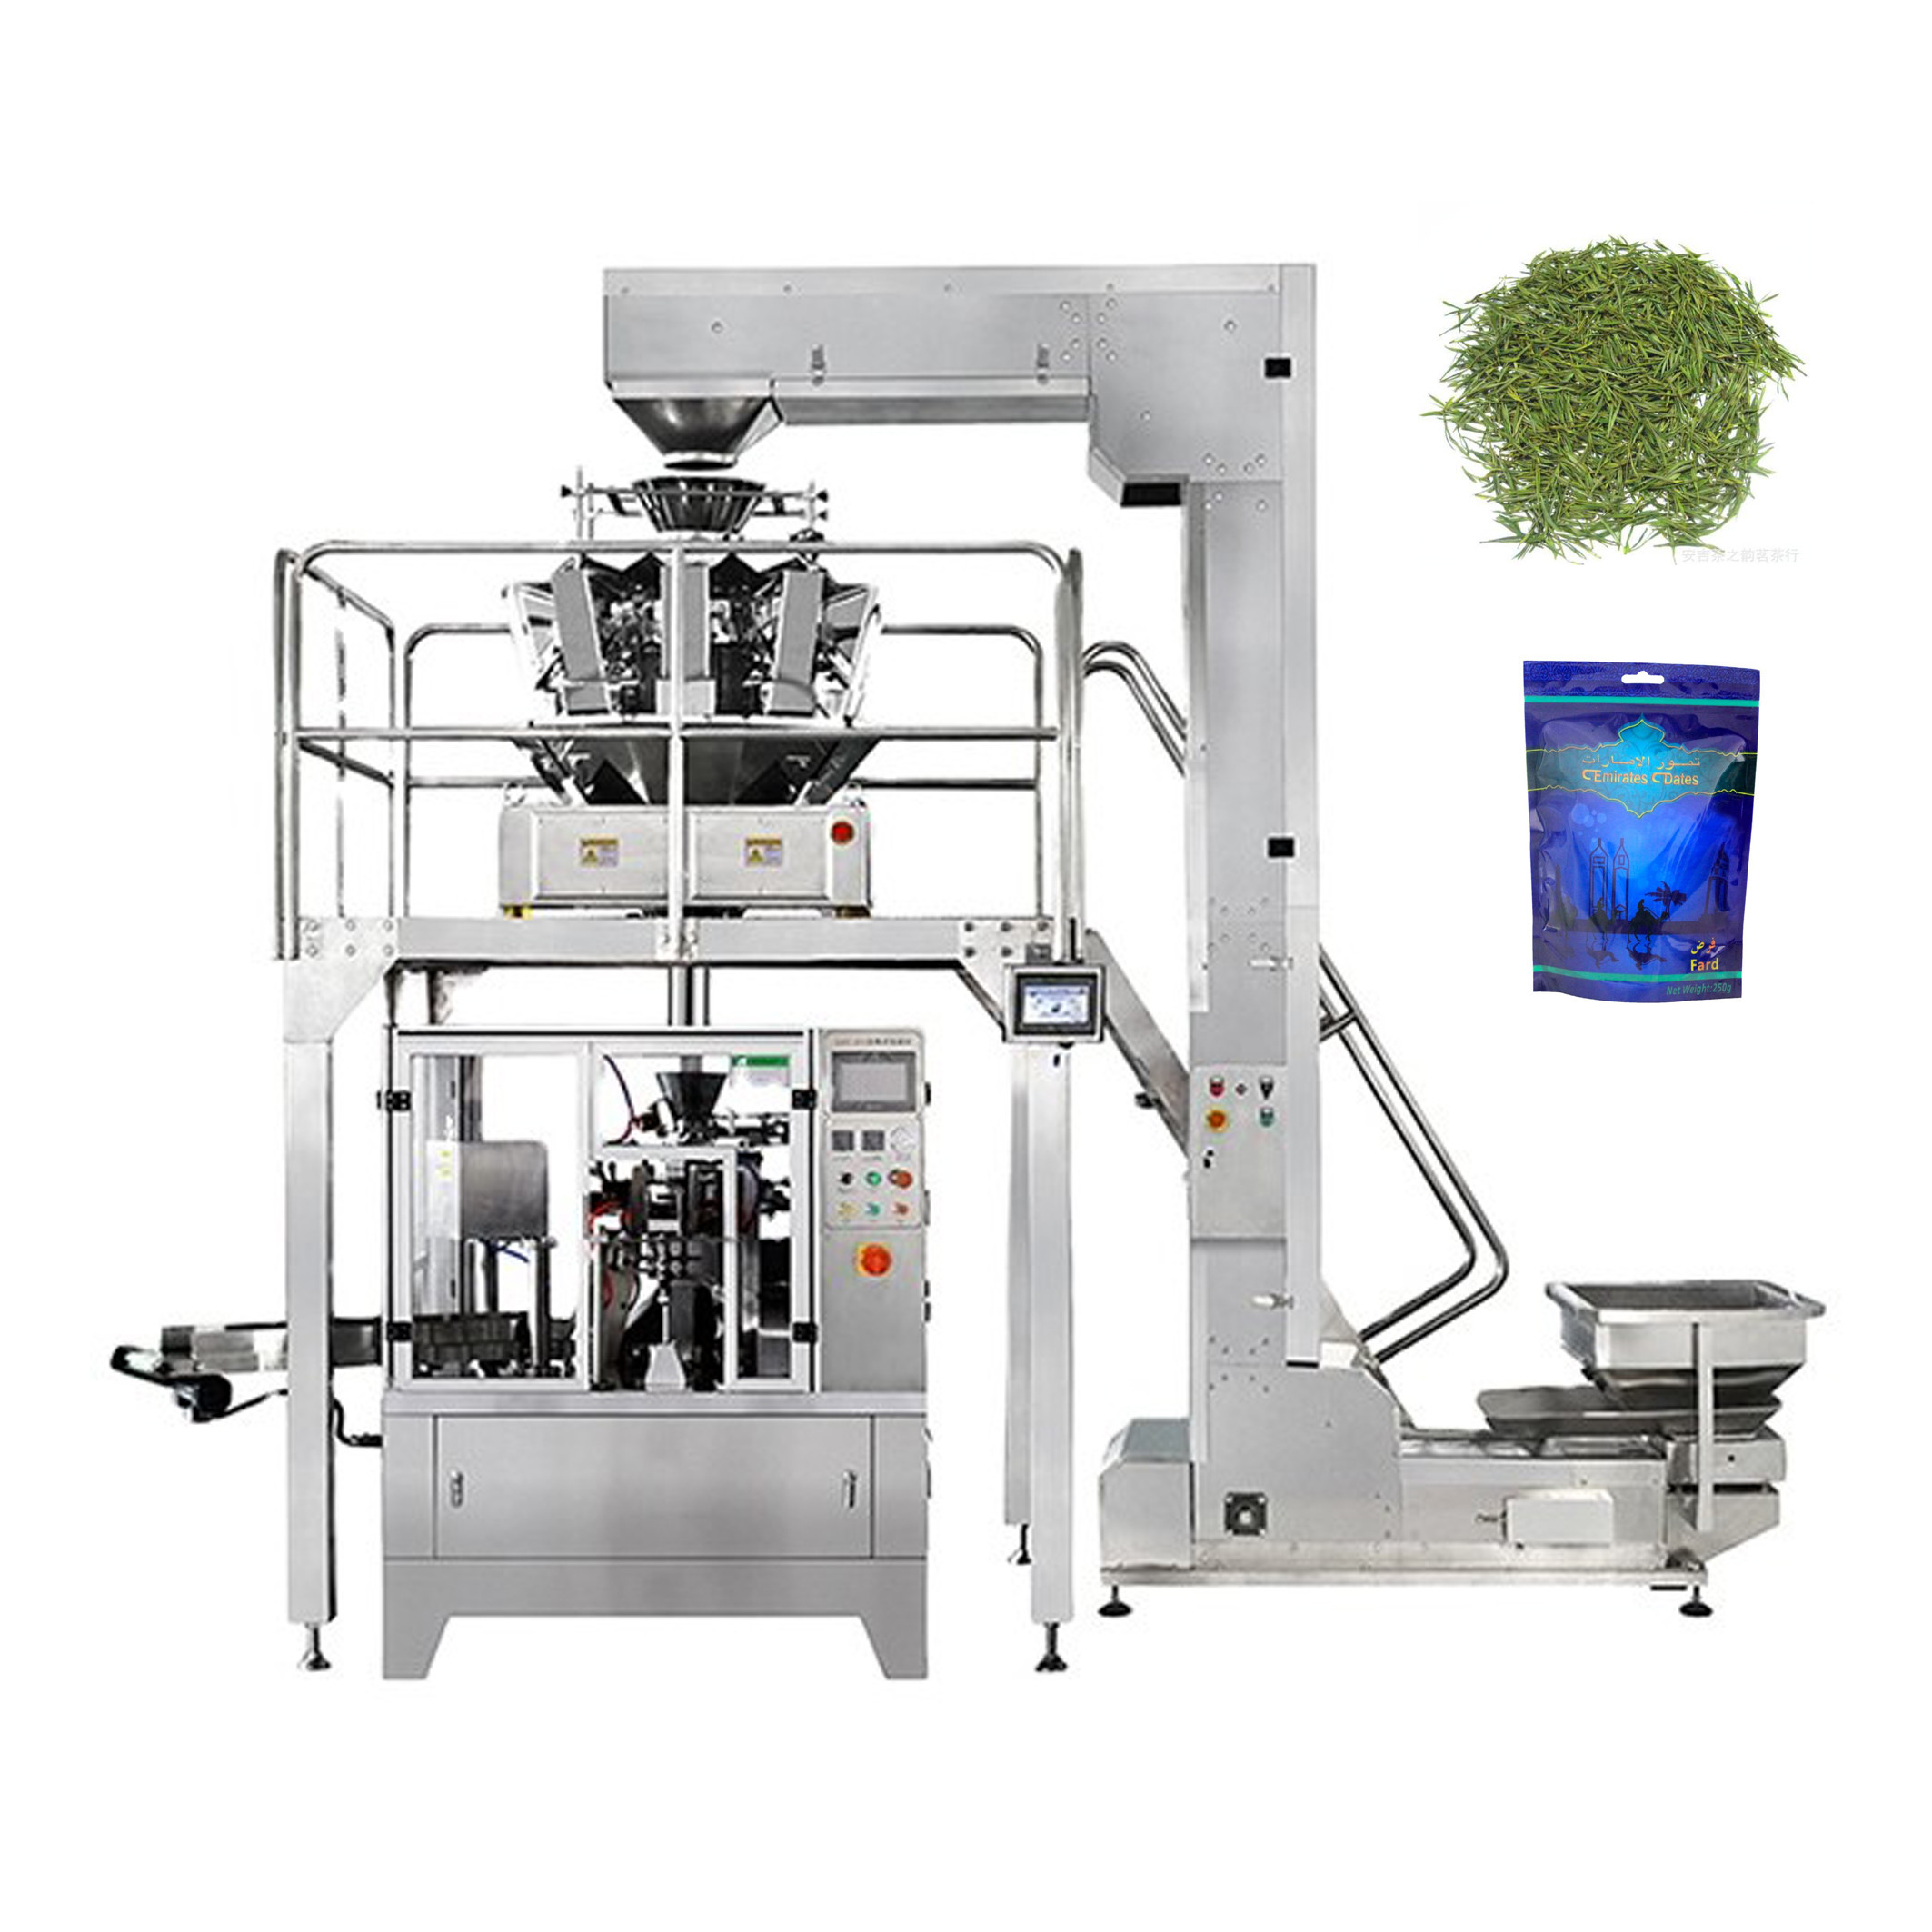 Automatic Premade Bag Packing Machine For Weighing Food Snack 50bags/Min